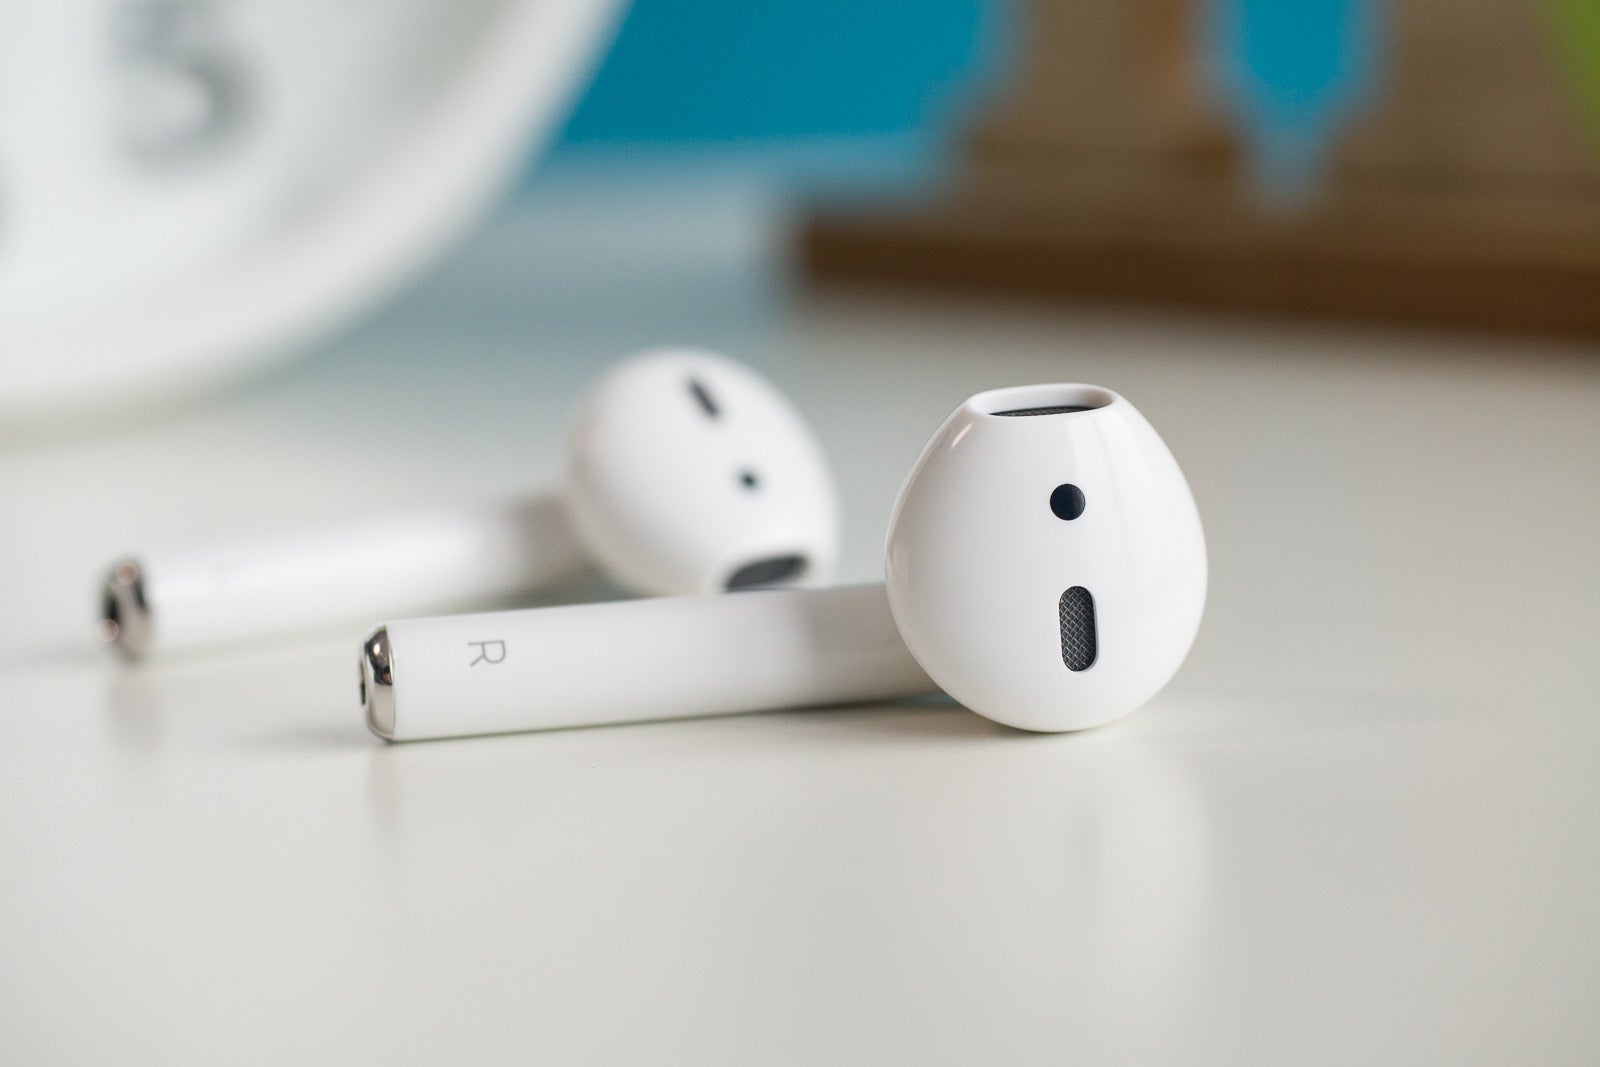 Current-generation Apple AirPods - AirPods 3 with noise cancellation spotted bearing new design in iOS 13.2 beta